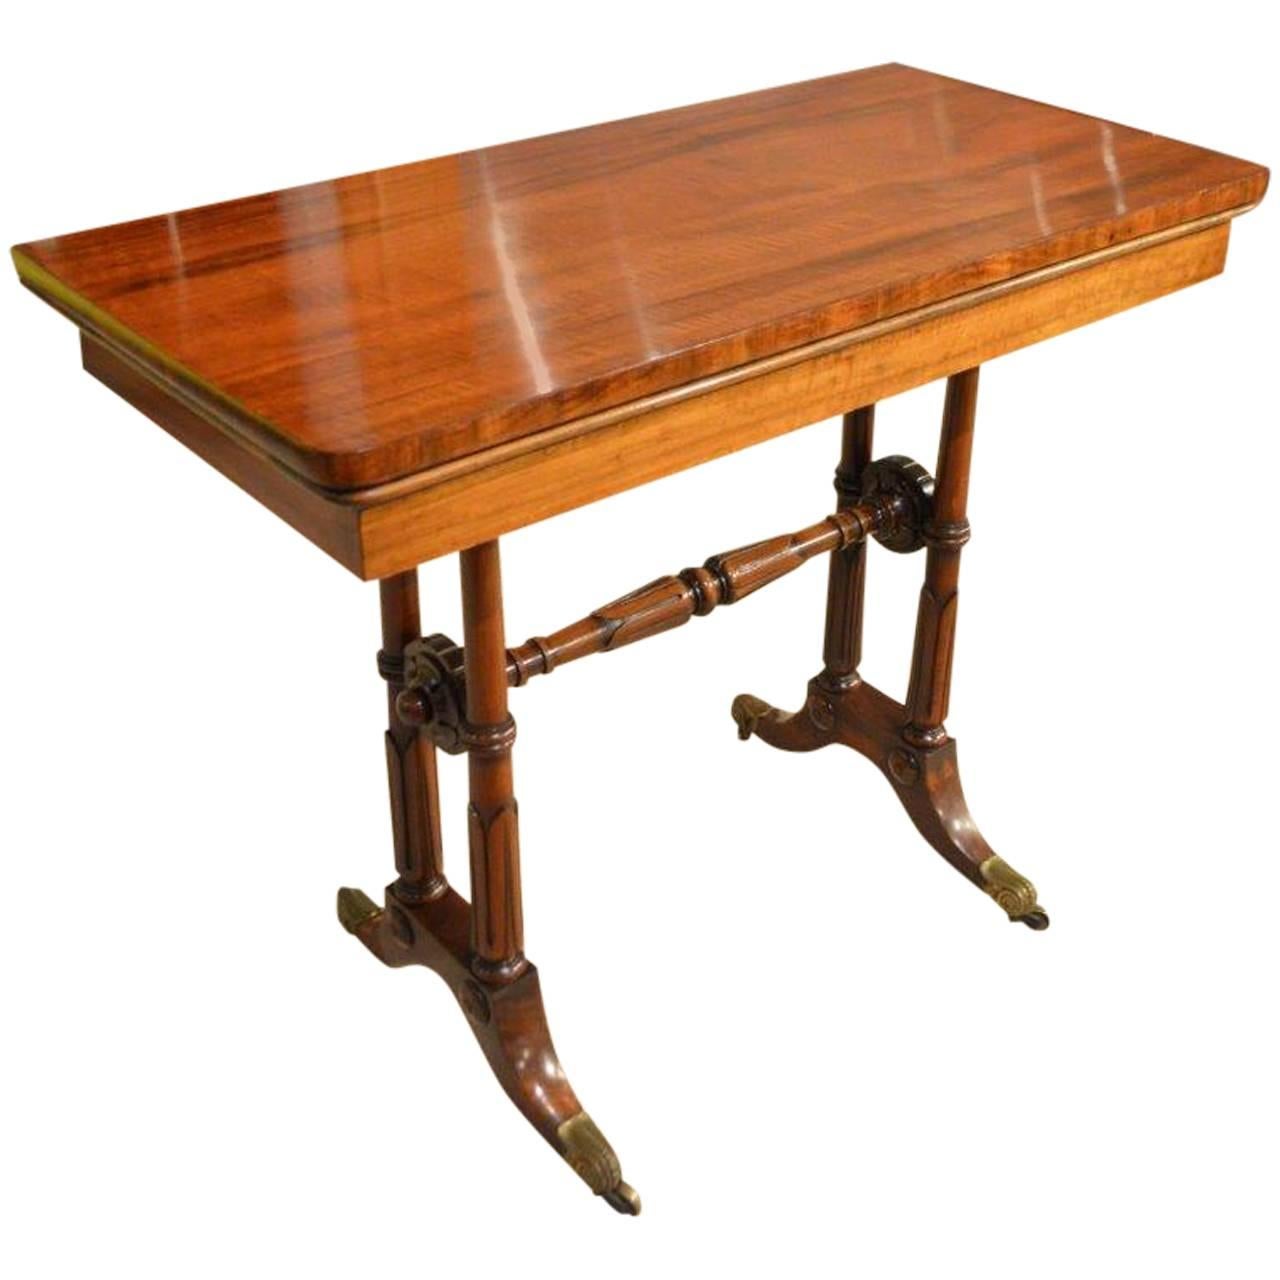 Goncalo Alves Late Regency Period Fold over Card Table